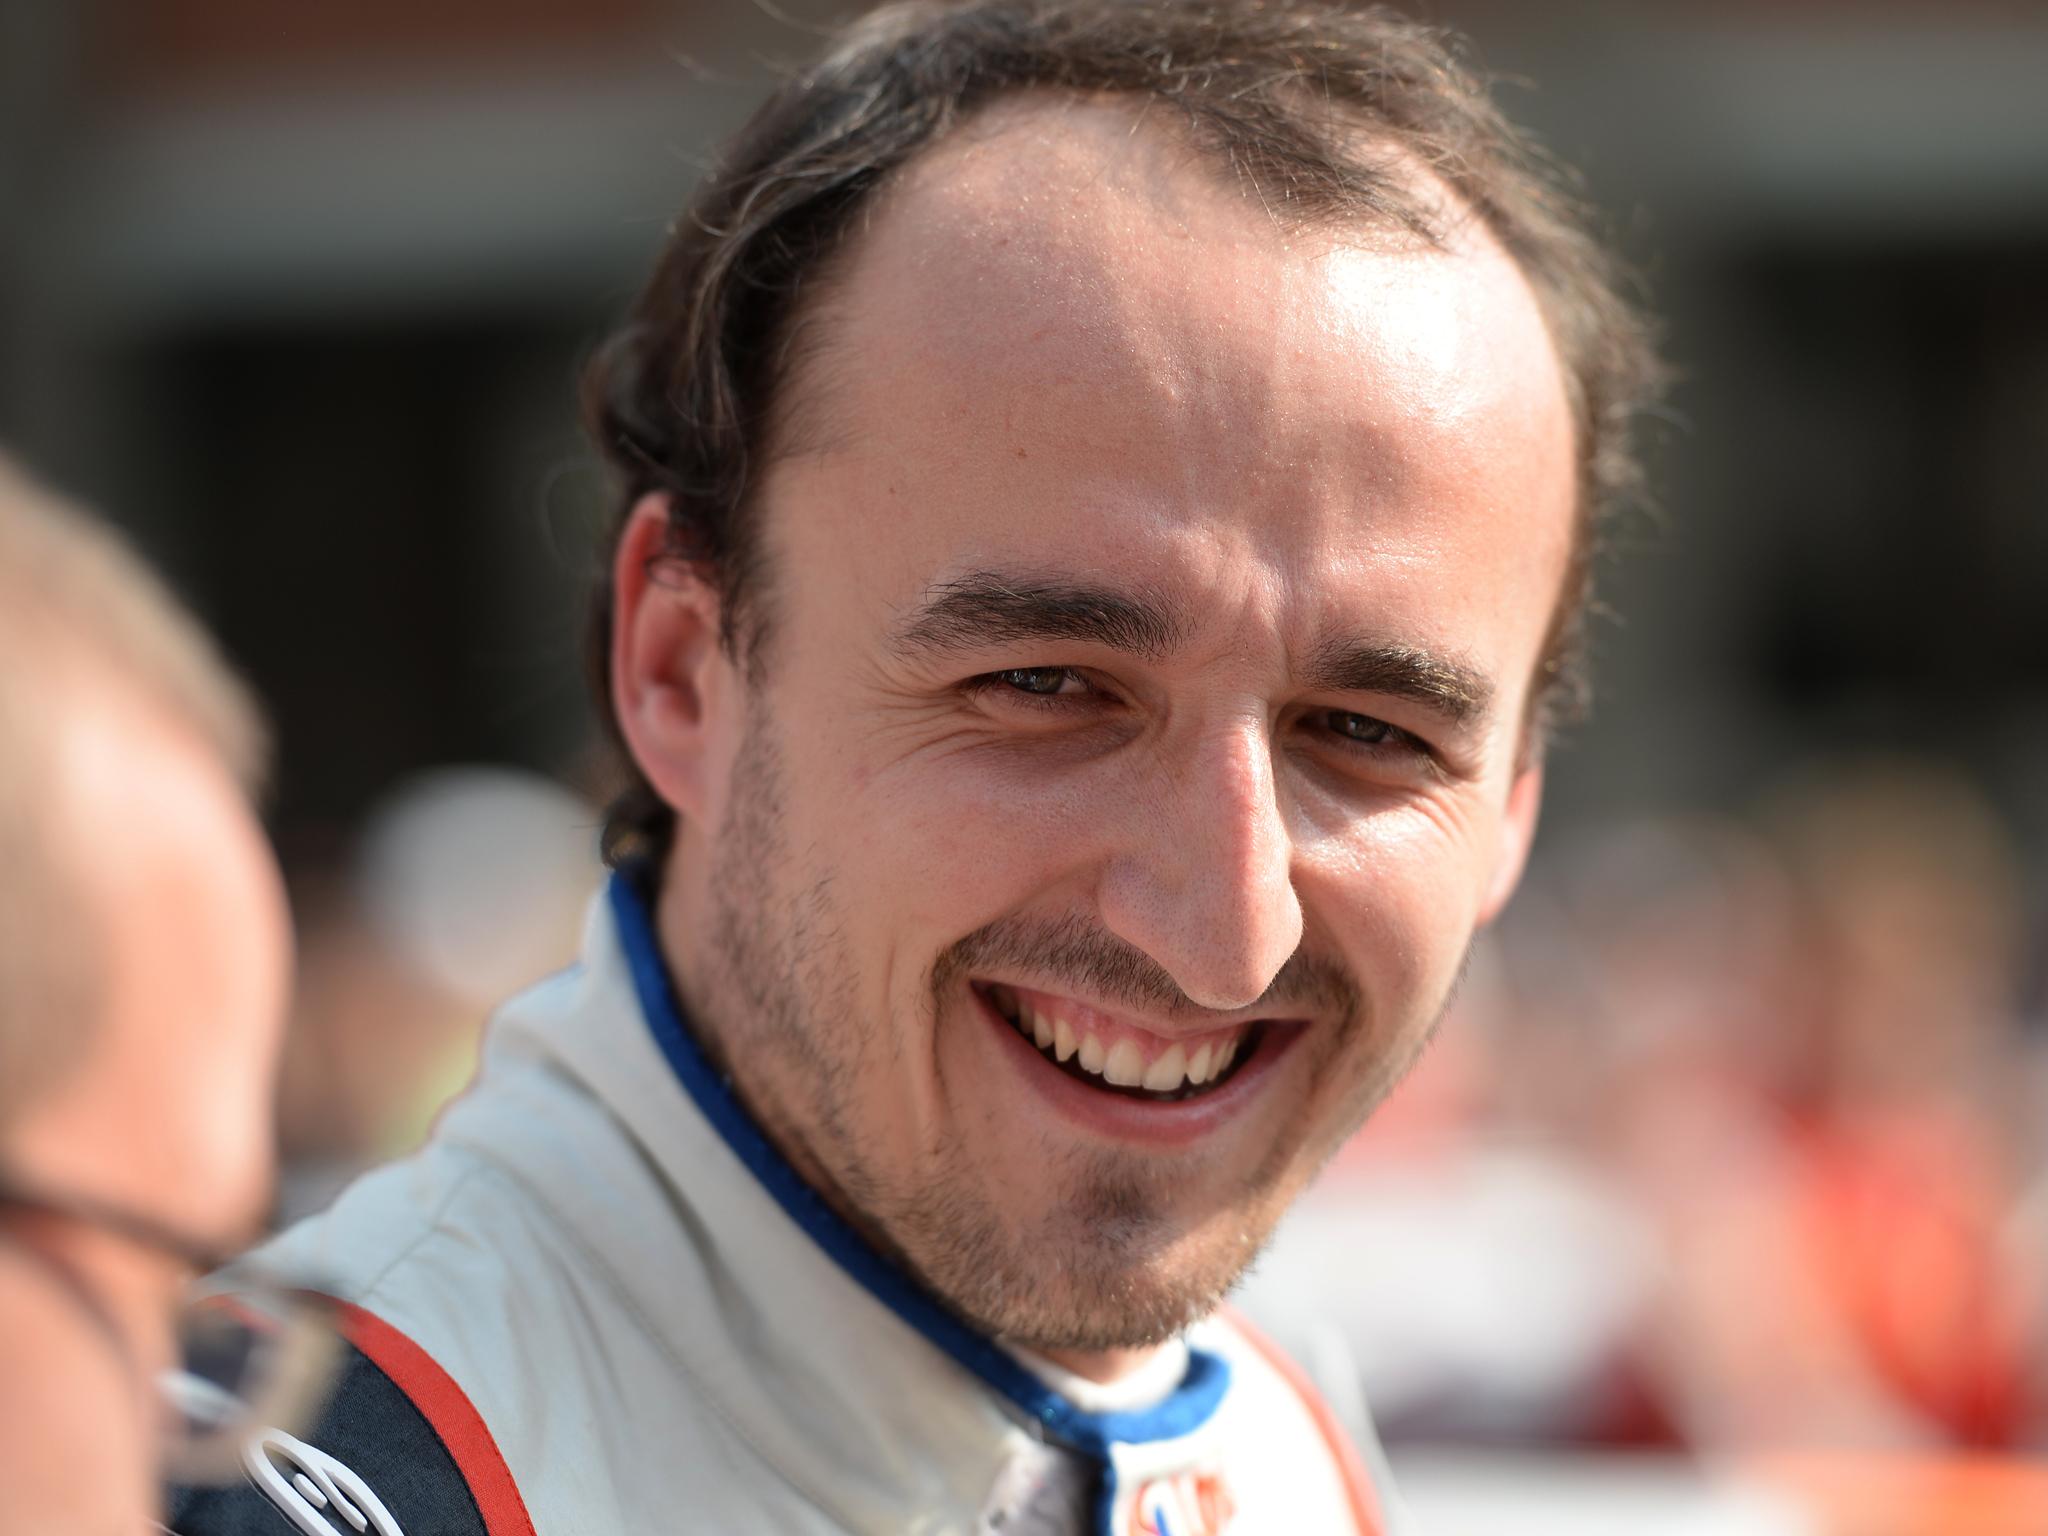 Ex-Formula One driver Robert Kubica was award the inaugural FIA 'Personality of the Year award